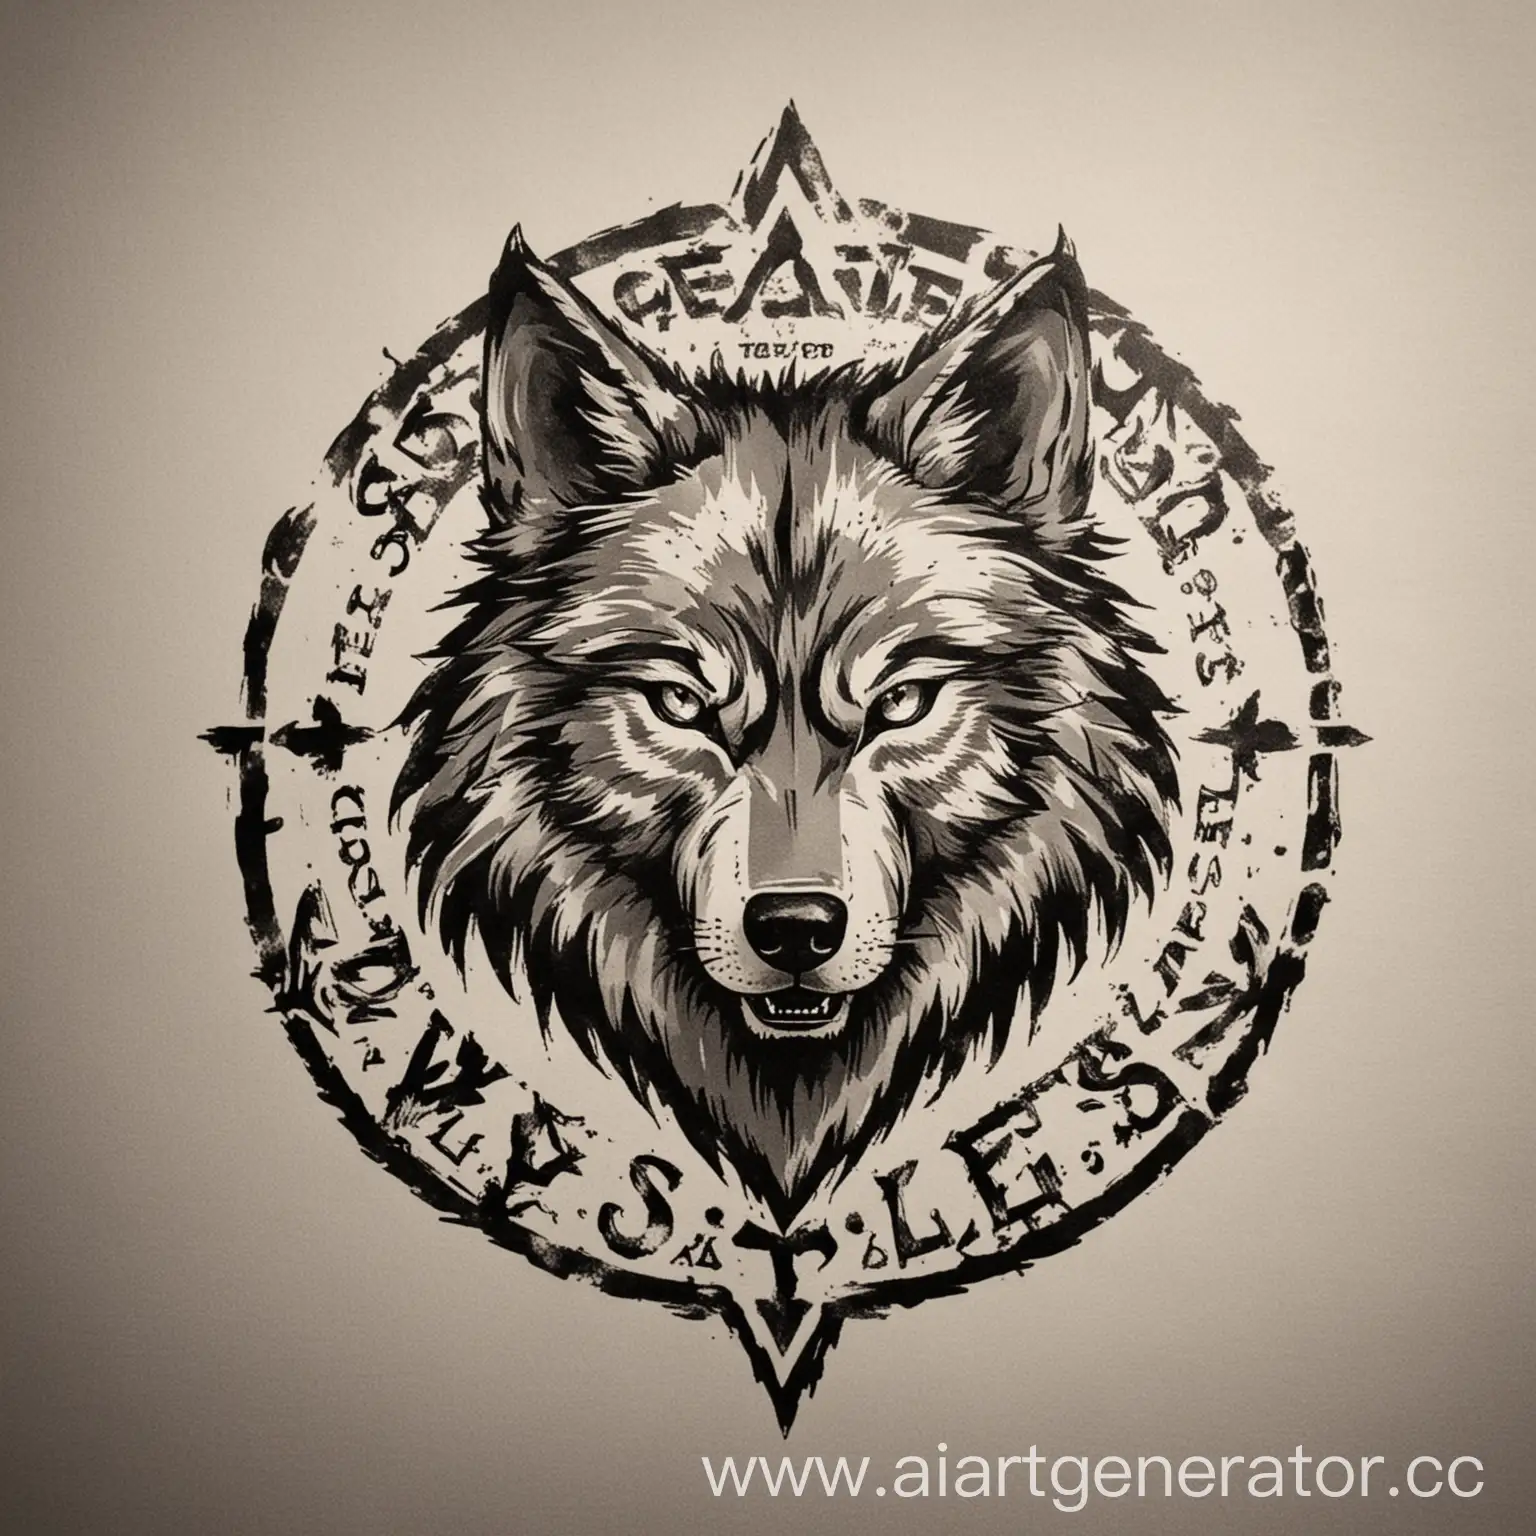 I want it to be the logo of the Wolves Gang, which symbolizes strength with a hidden slogan